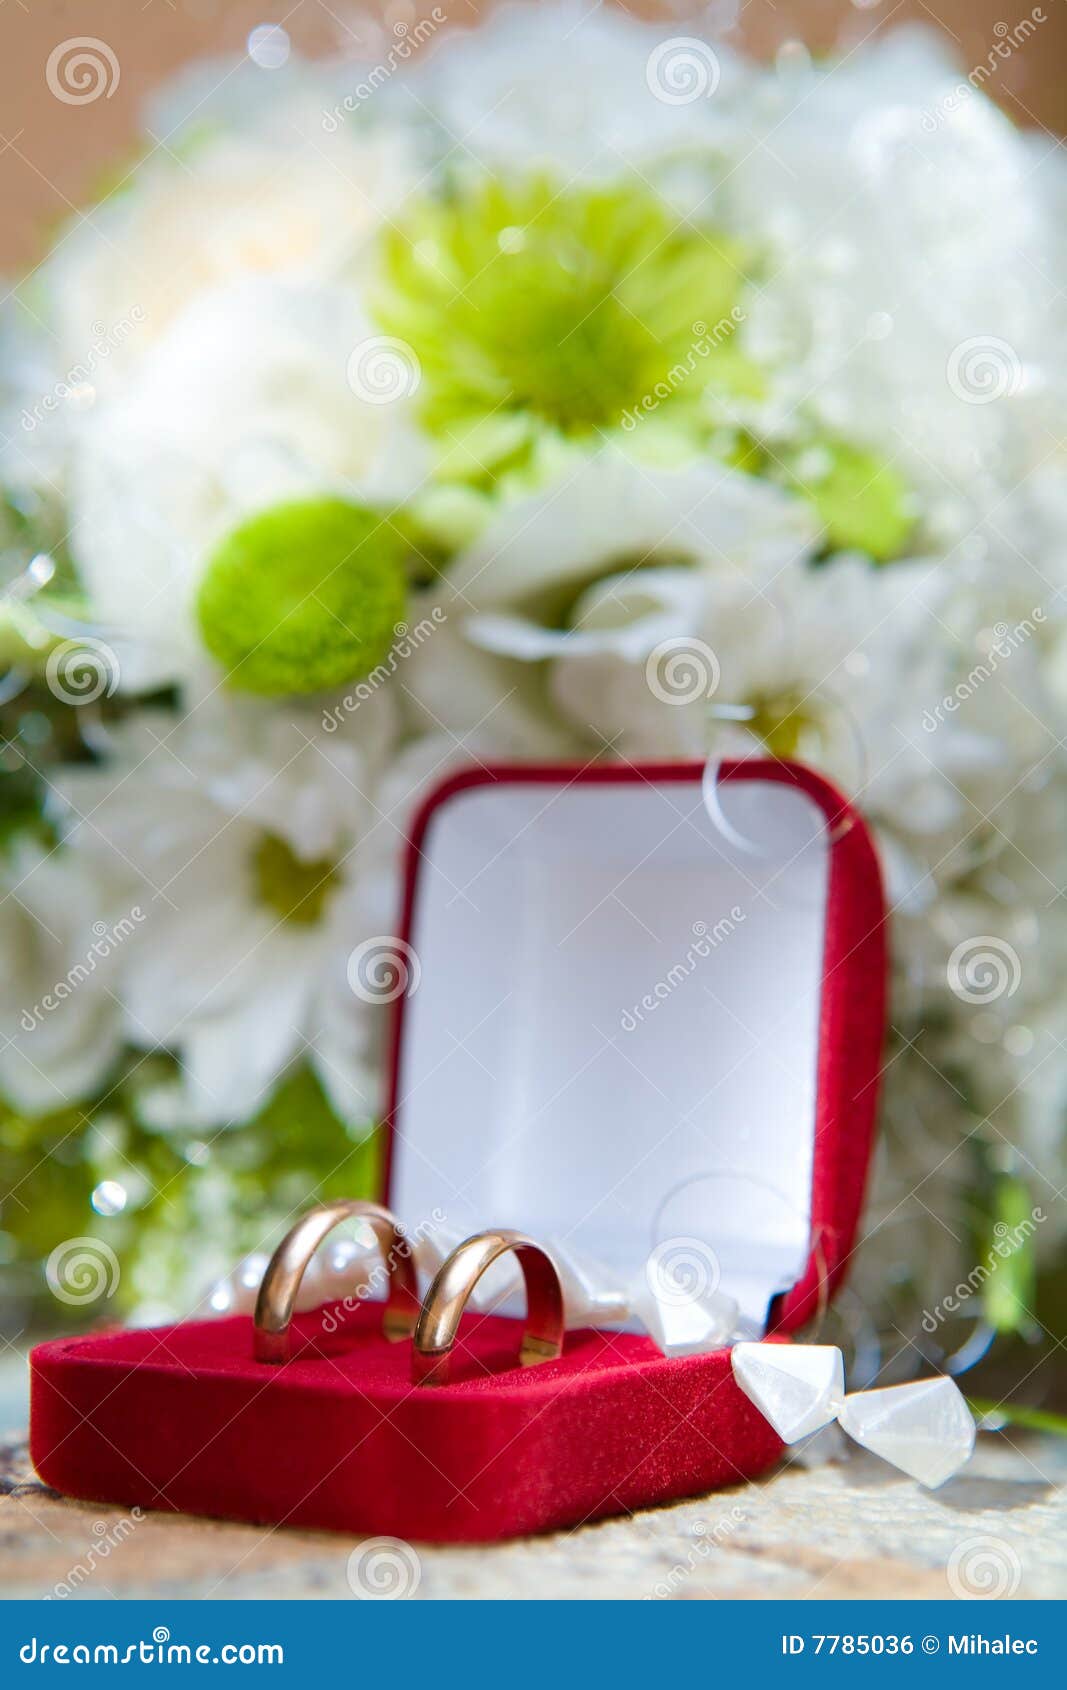 Wedding Rings in a Decorative Box Stock Photo - Image of accessory ...